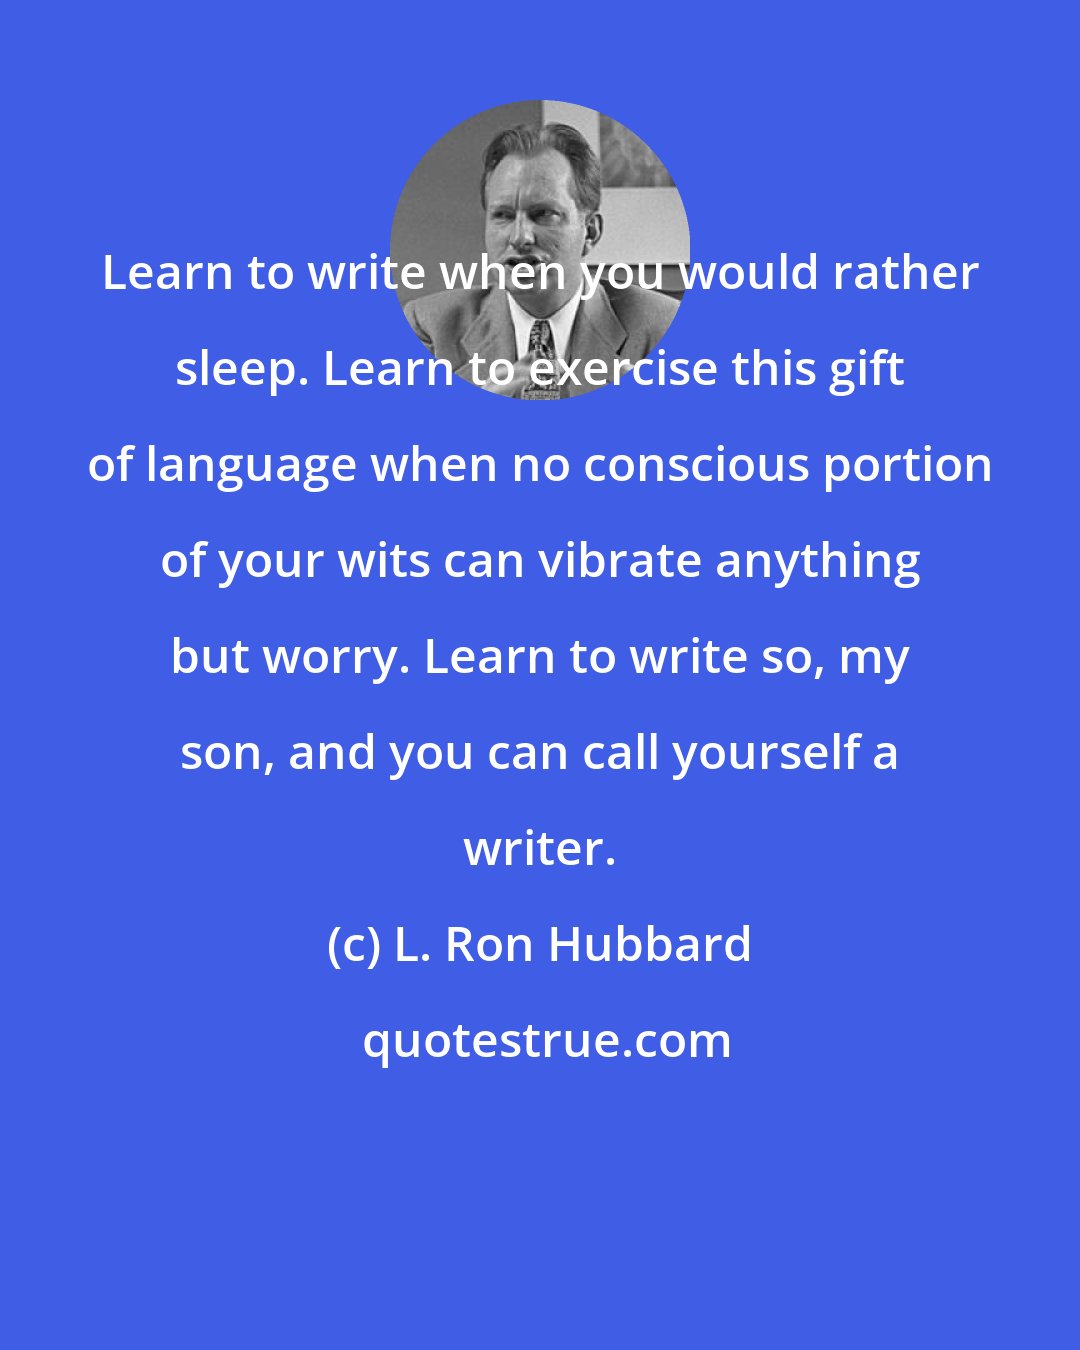 L. Ron Hubbard: Learn to write when you would rather sleep. Learn to exercise this gift of language when no conscious portion of your wits can vibrate anything but worry. Learn to write so, my son, and you can call yourself a writer.